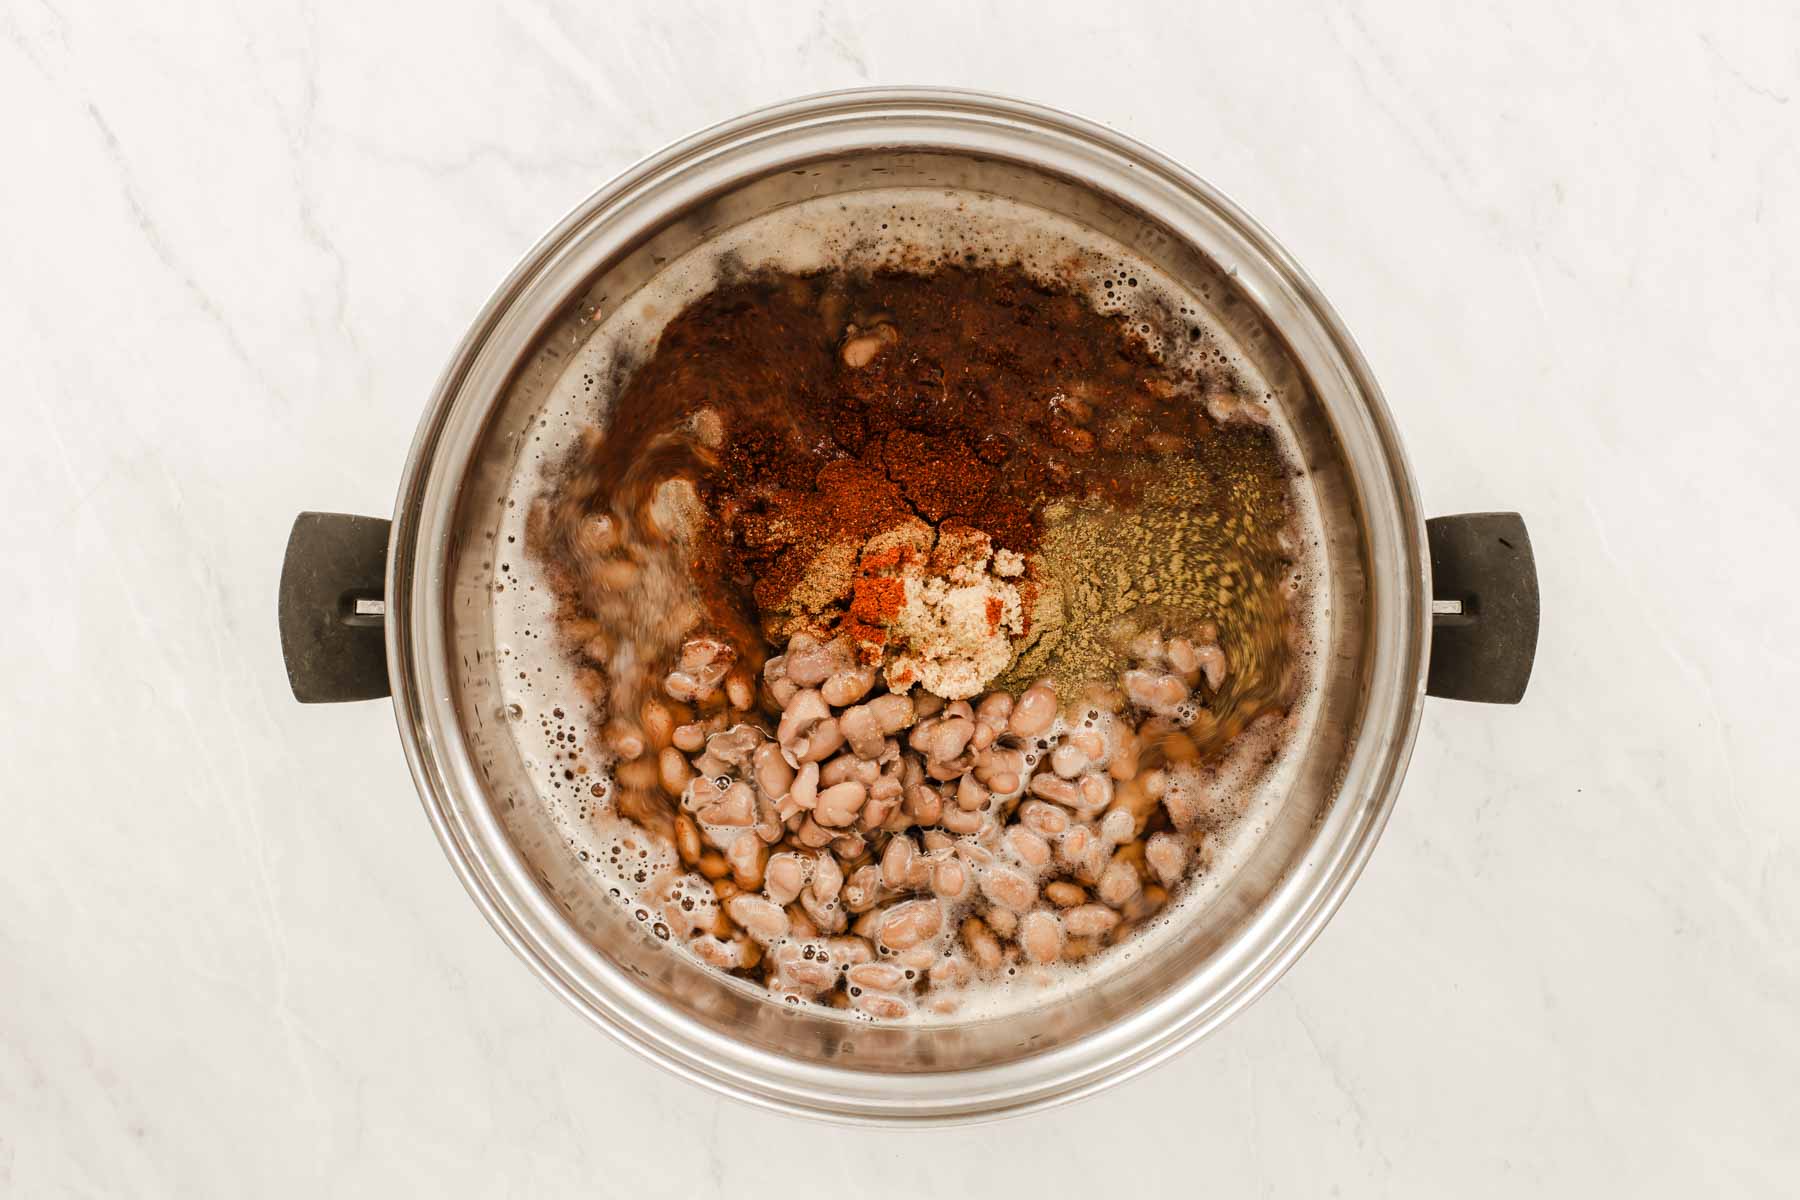 Pot of beans with spices stirred in.